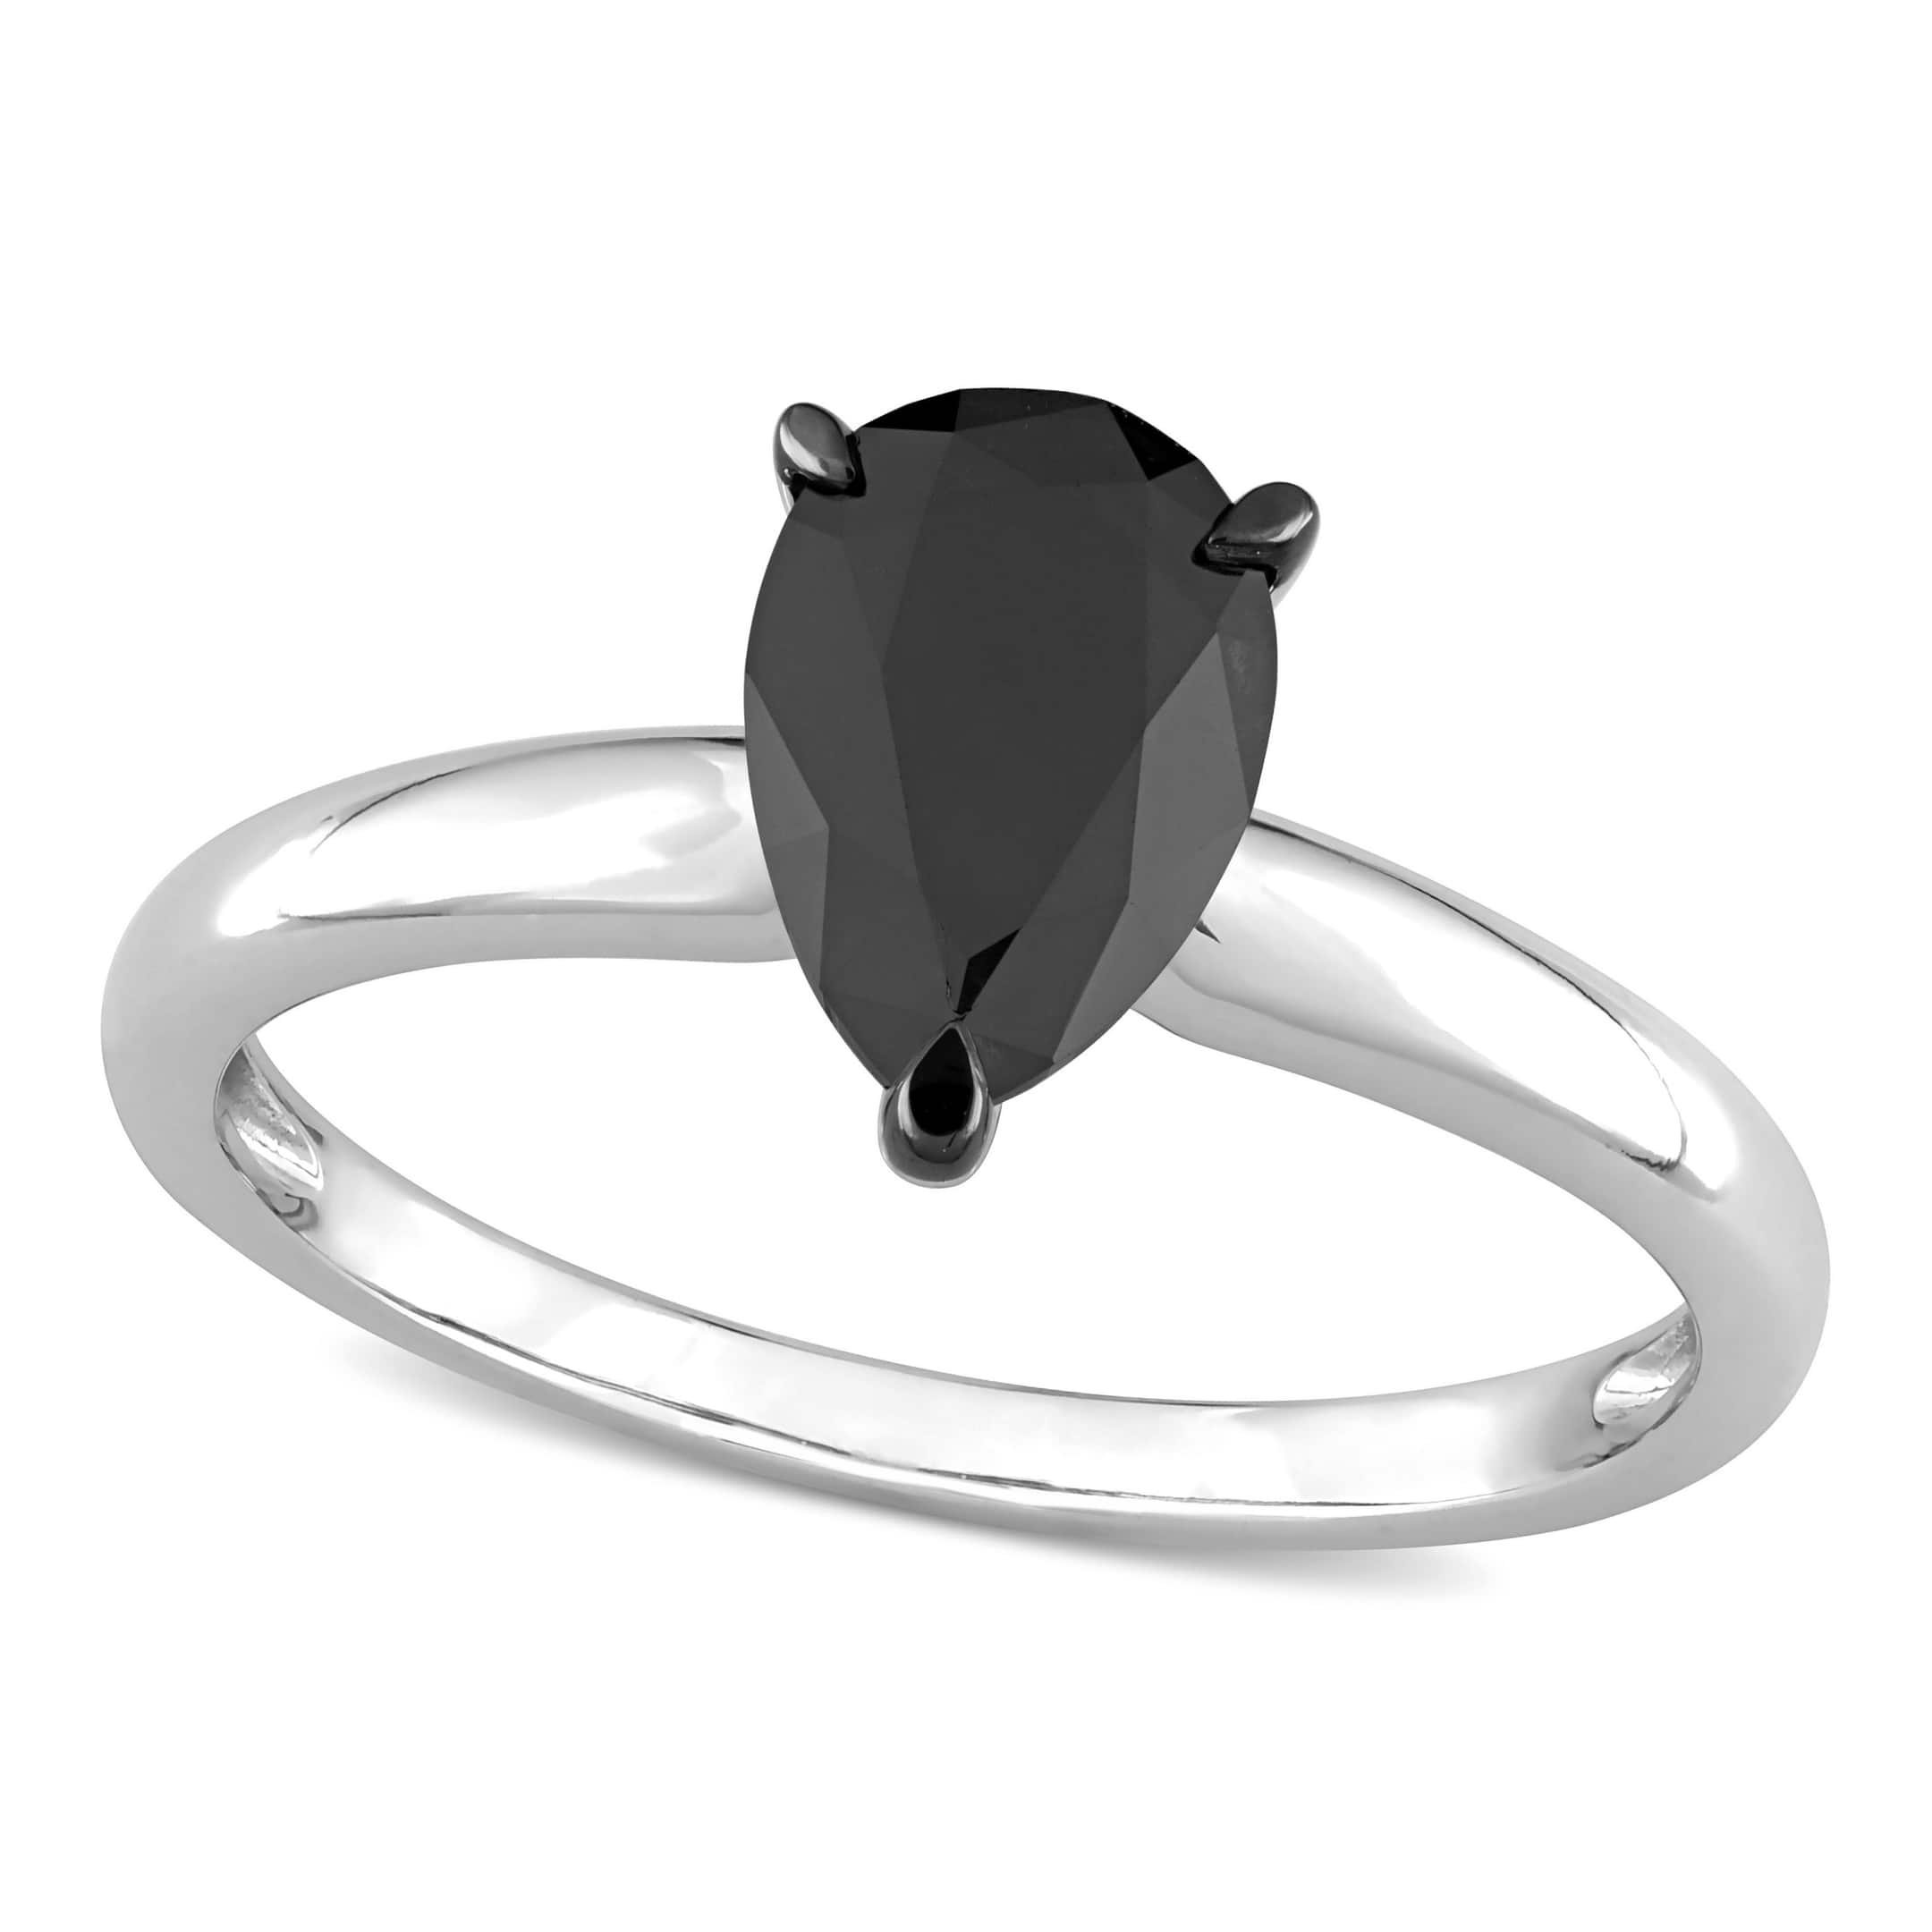 Pear Cut Black Diamond Solitaire Ring in 14k White Gold (1.00ct)